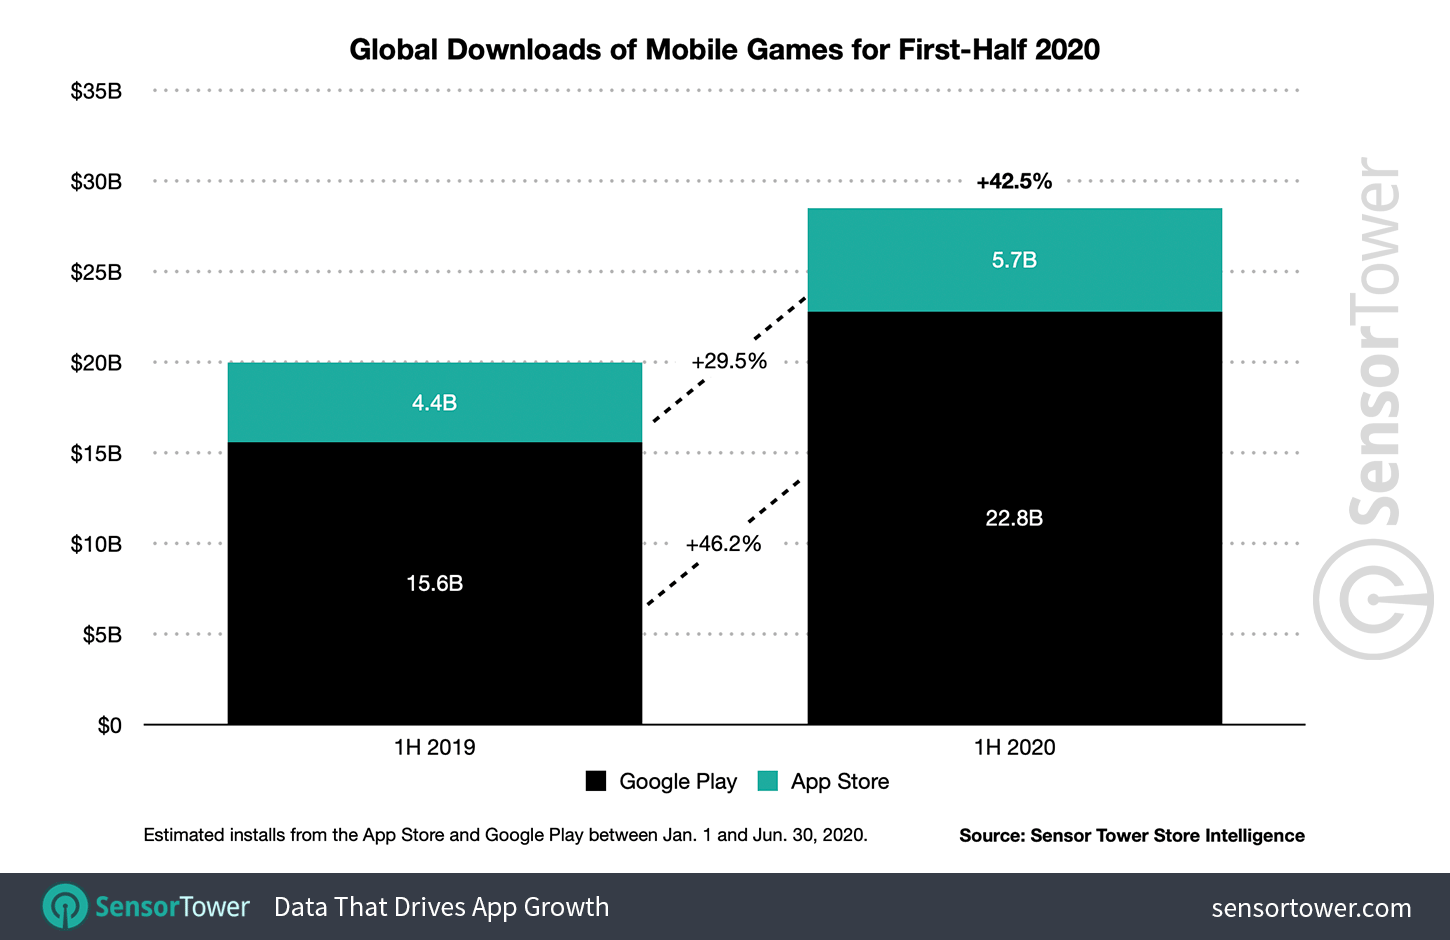 1H 2020 Mobile Game Downloads